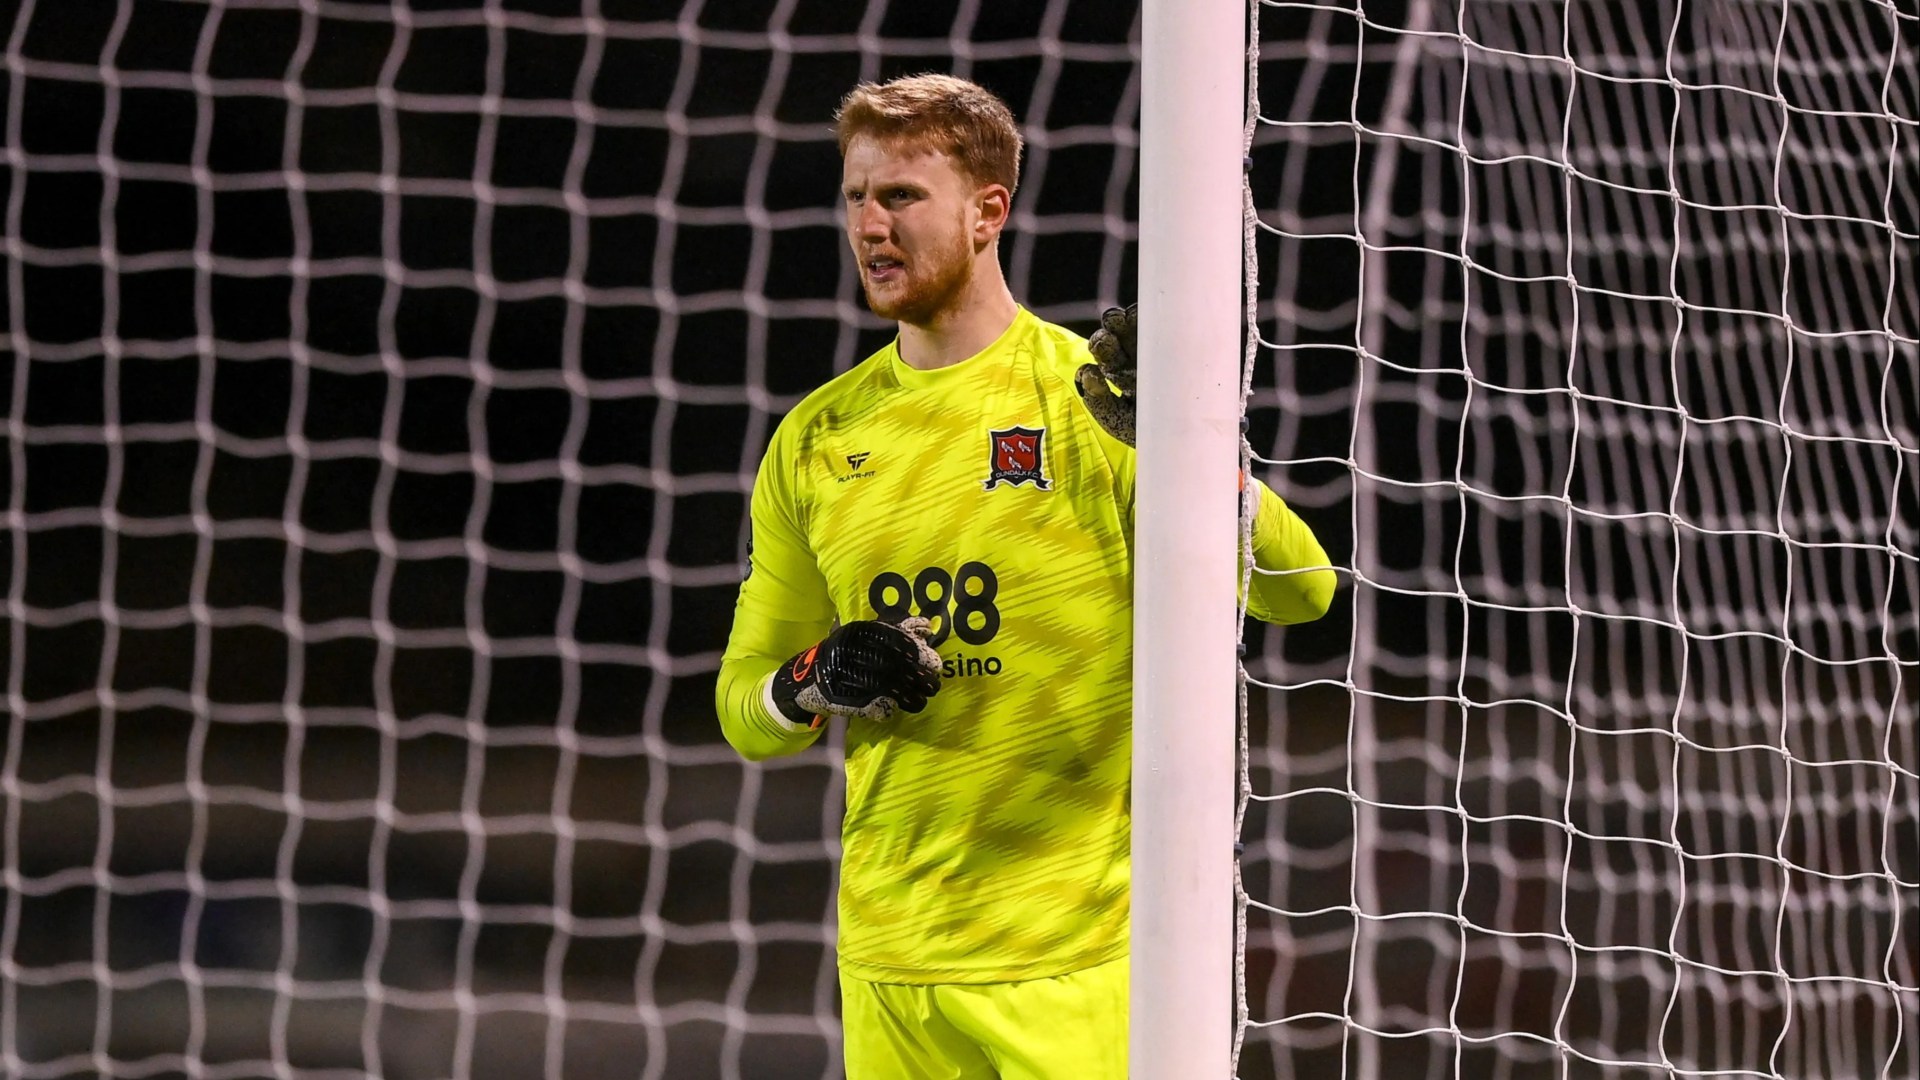 Dundalk goalkeeper handed ten-game ban for comments made towards match official in Drogheda United clash [Video]